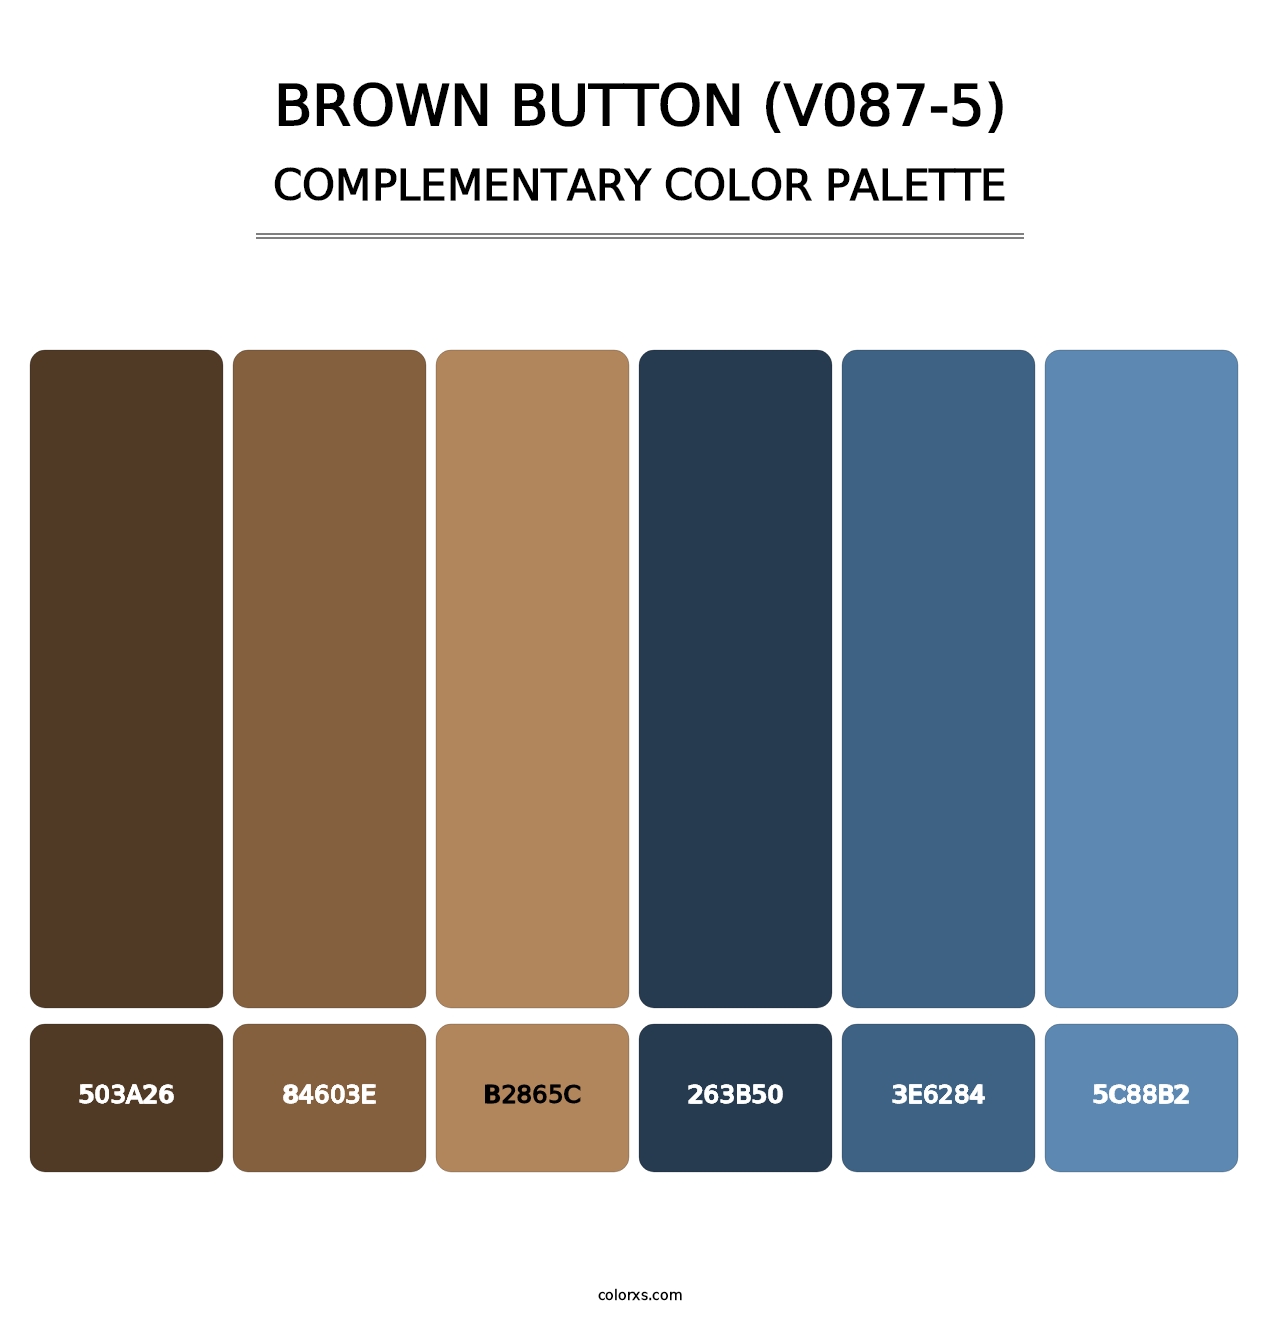 Brown Button (V087-5) - Complementary Color Palette